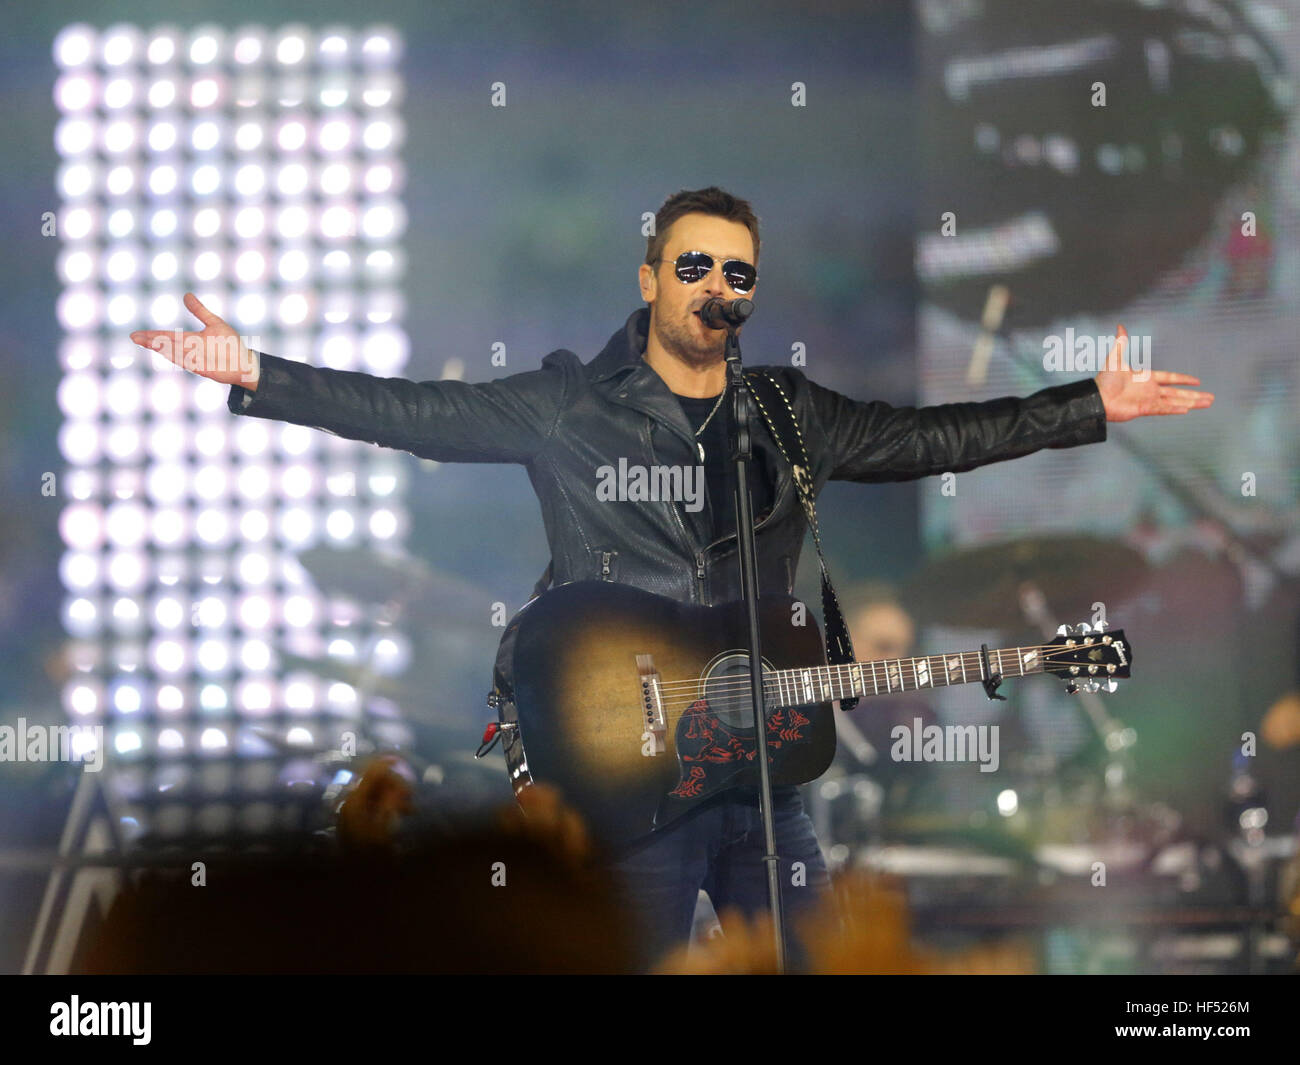 Eric Church performs during halftime of a NFL football game between